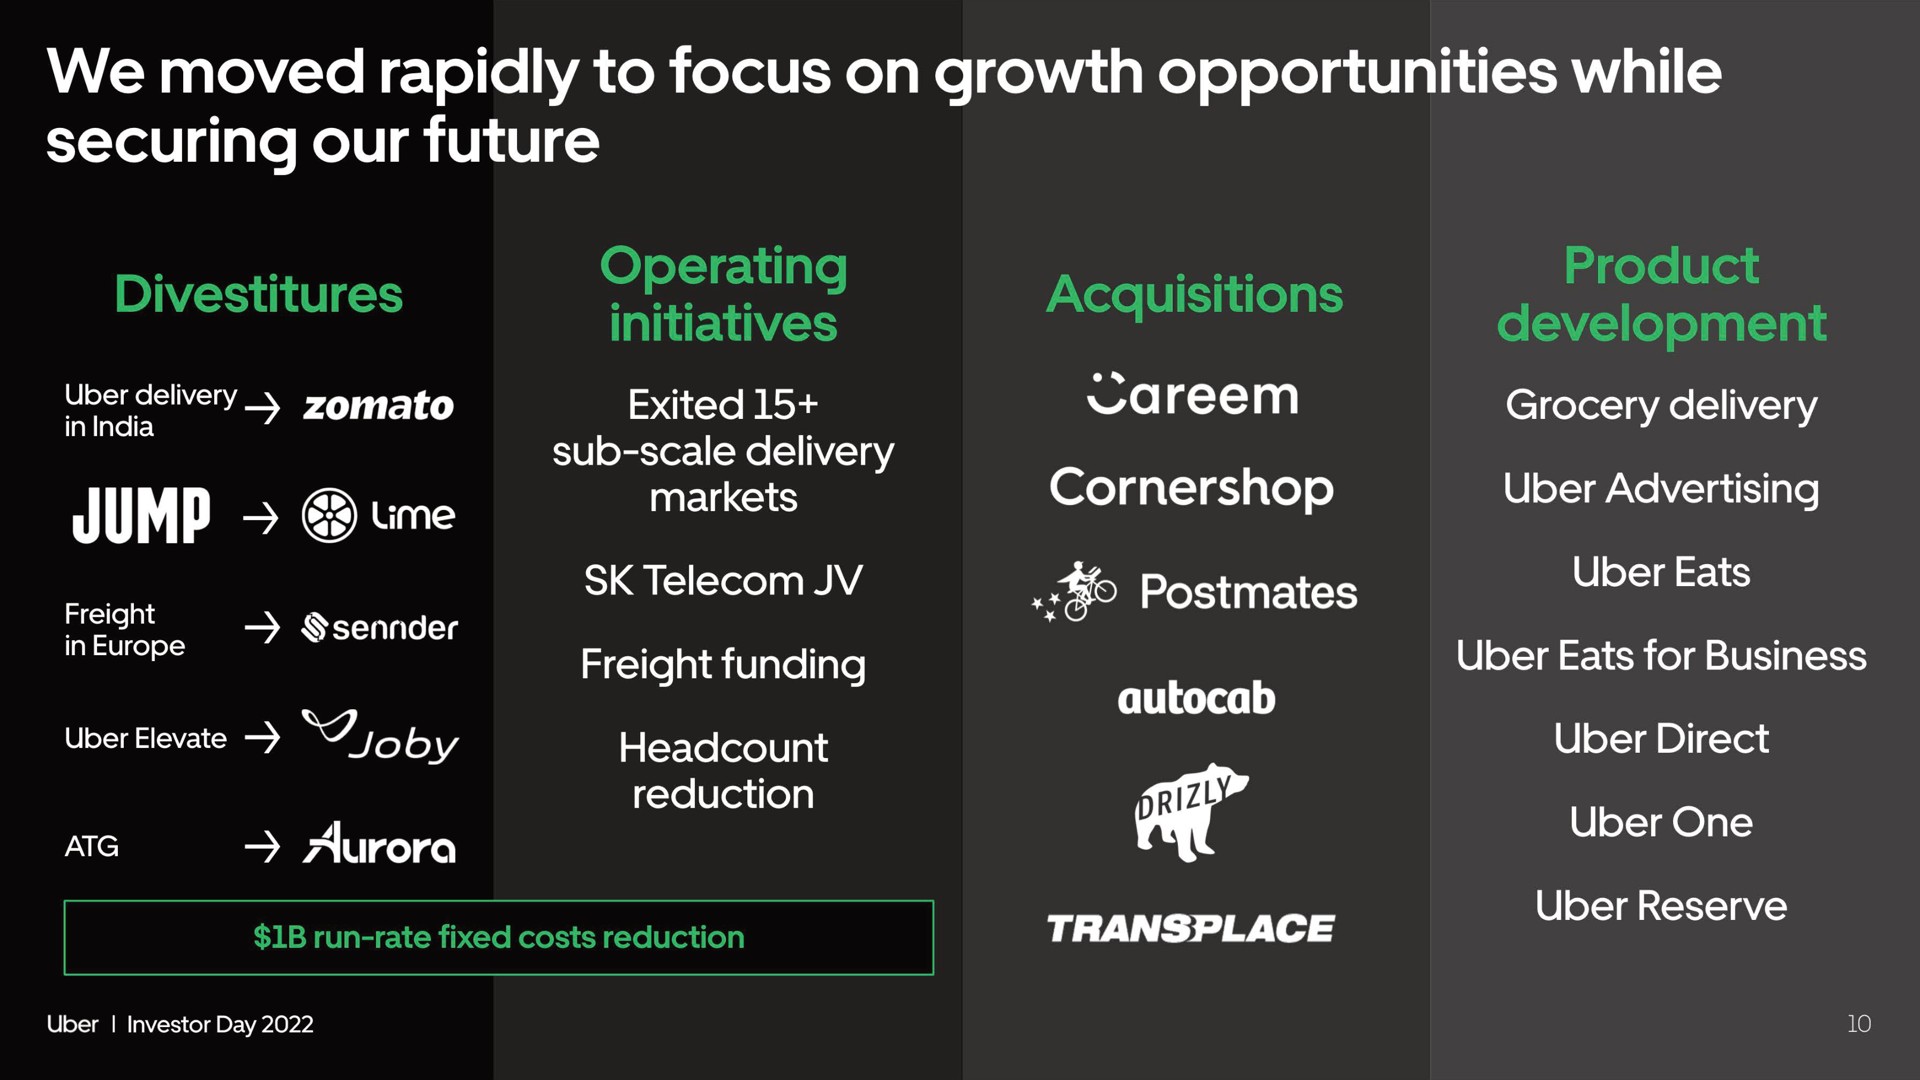 we moved rapidly to focus on growth opportunities while securing our future jump ume we operating development i | Uber